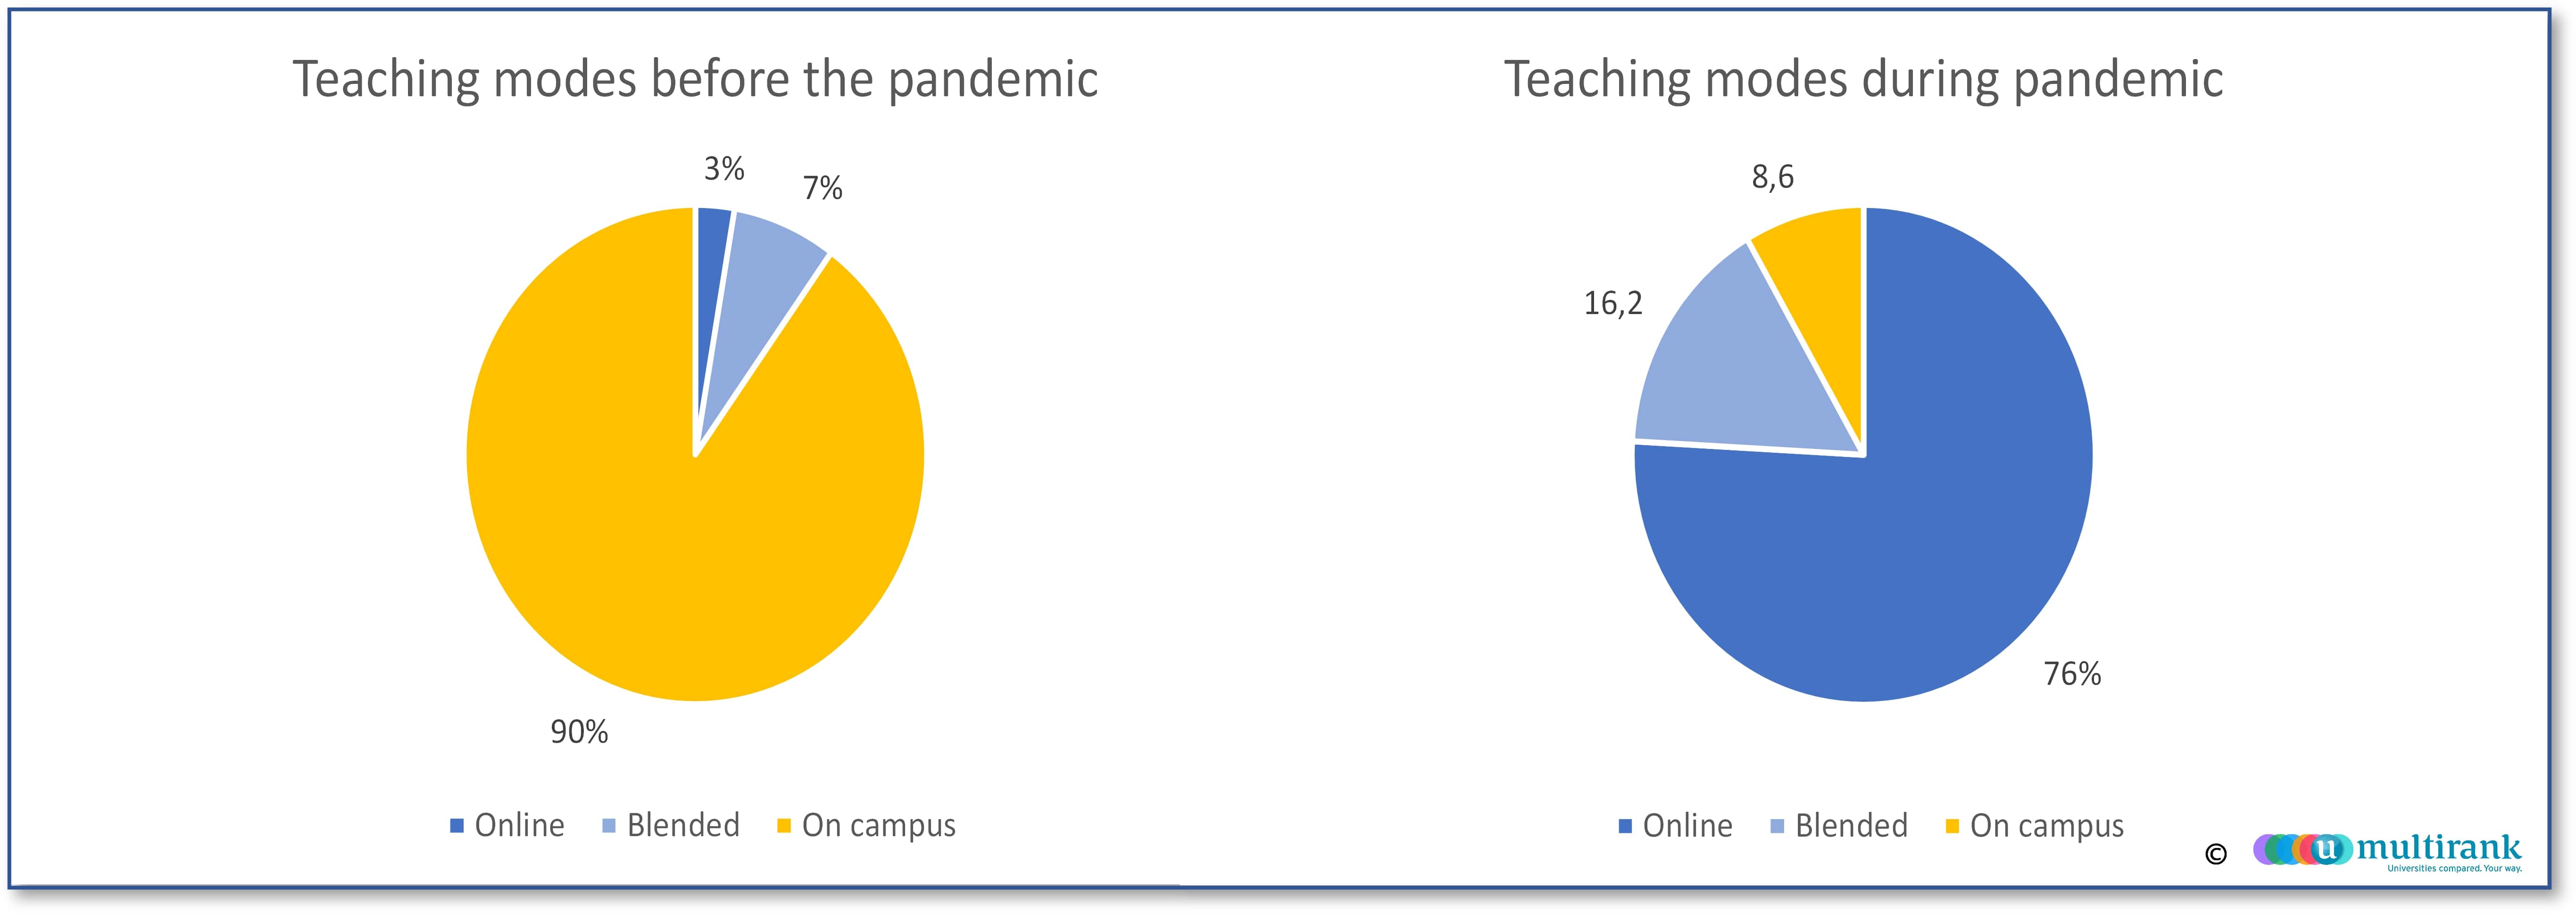 Teaching modes before and during the pandemic